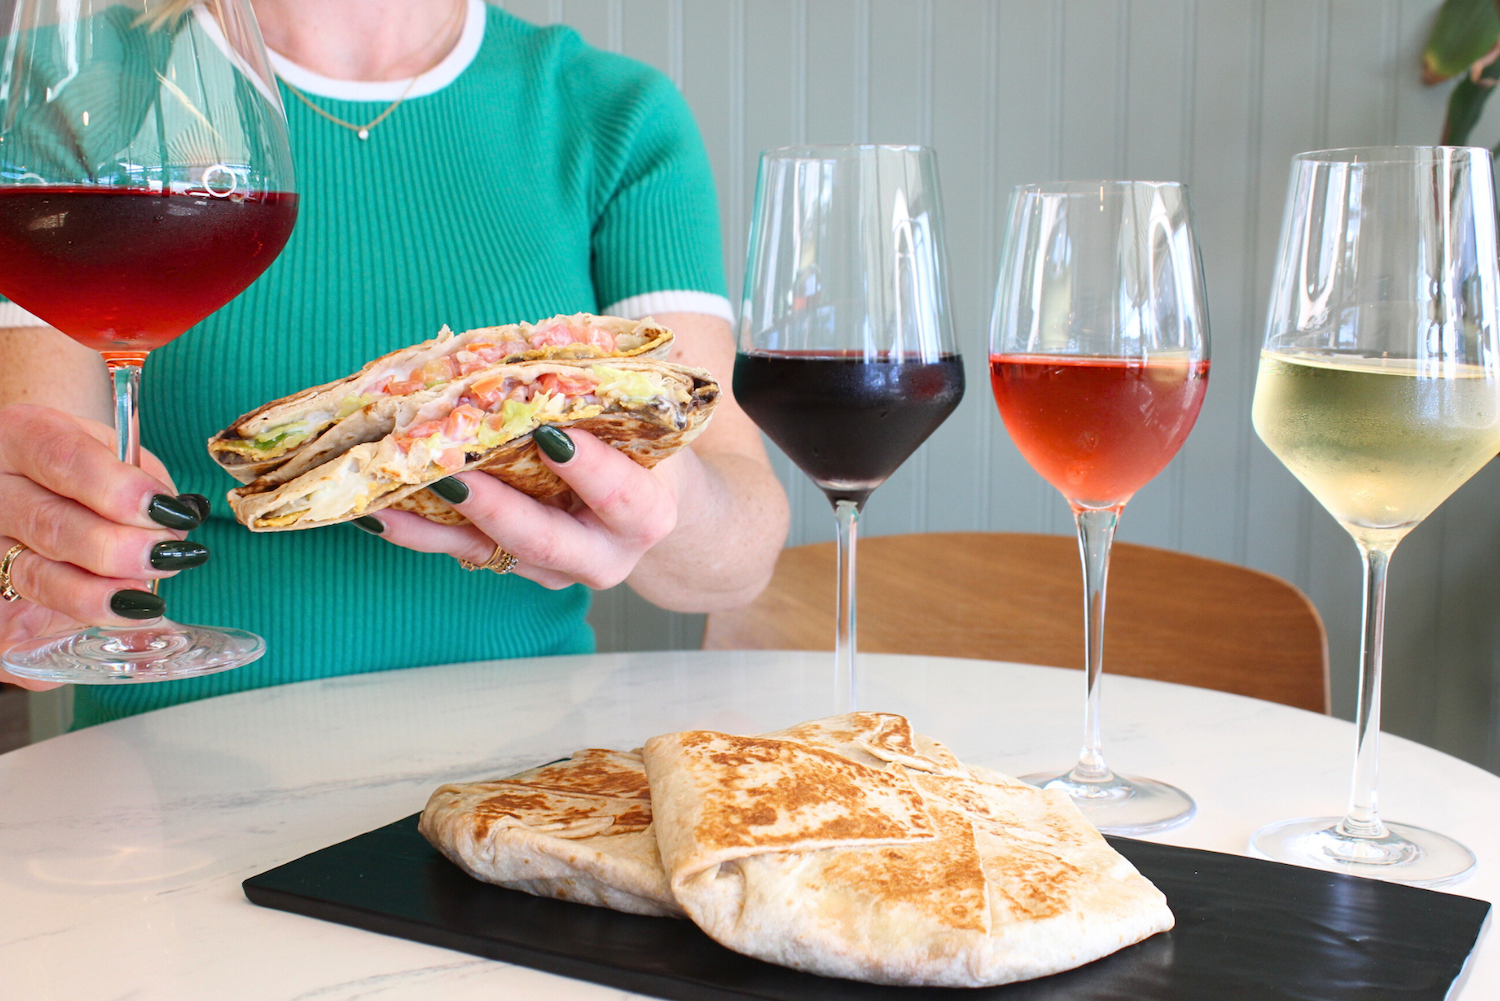 Crunchwrap Supremes on a plate with wine glasses filled with wine 